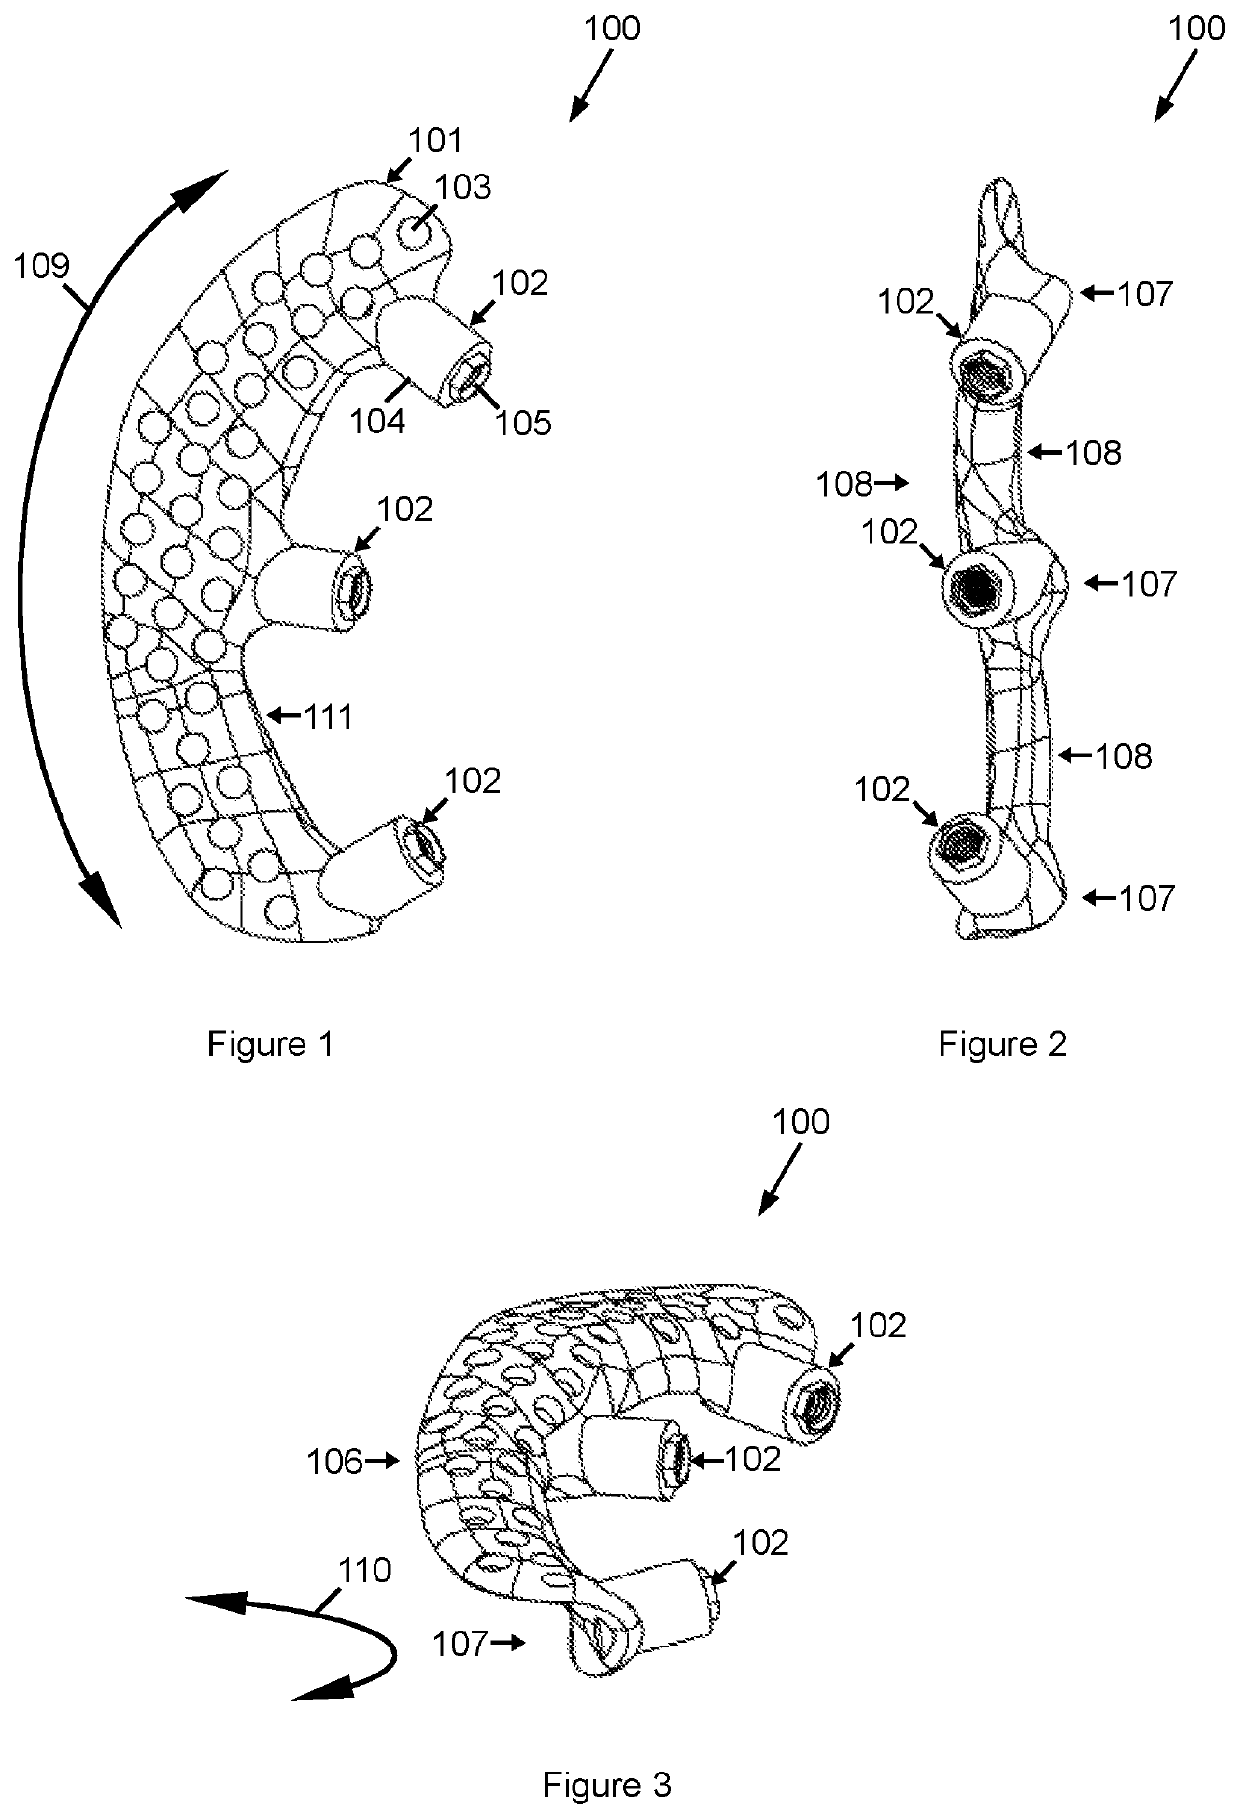 Procedure and orbital implant for orbit anchored bone affixation of an eye prosthesis